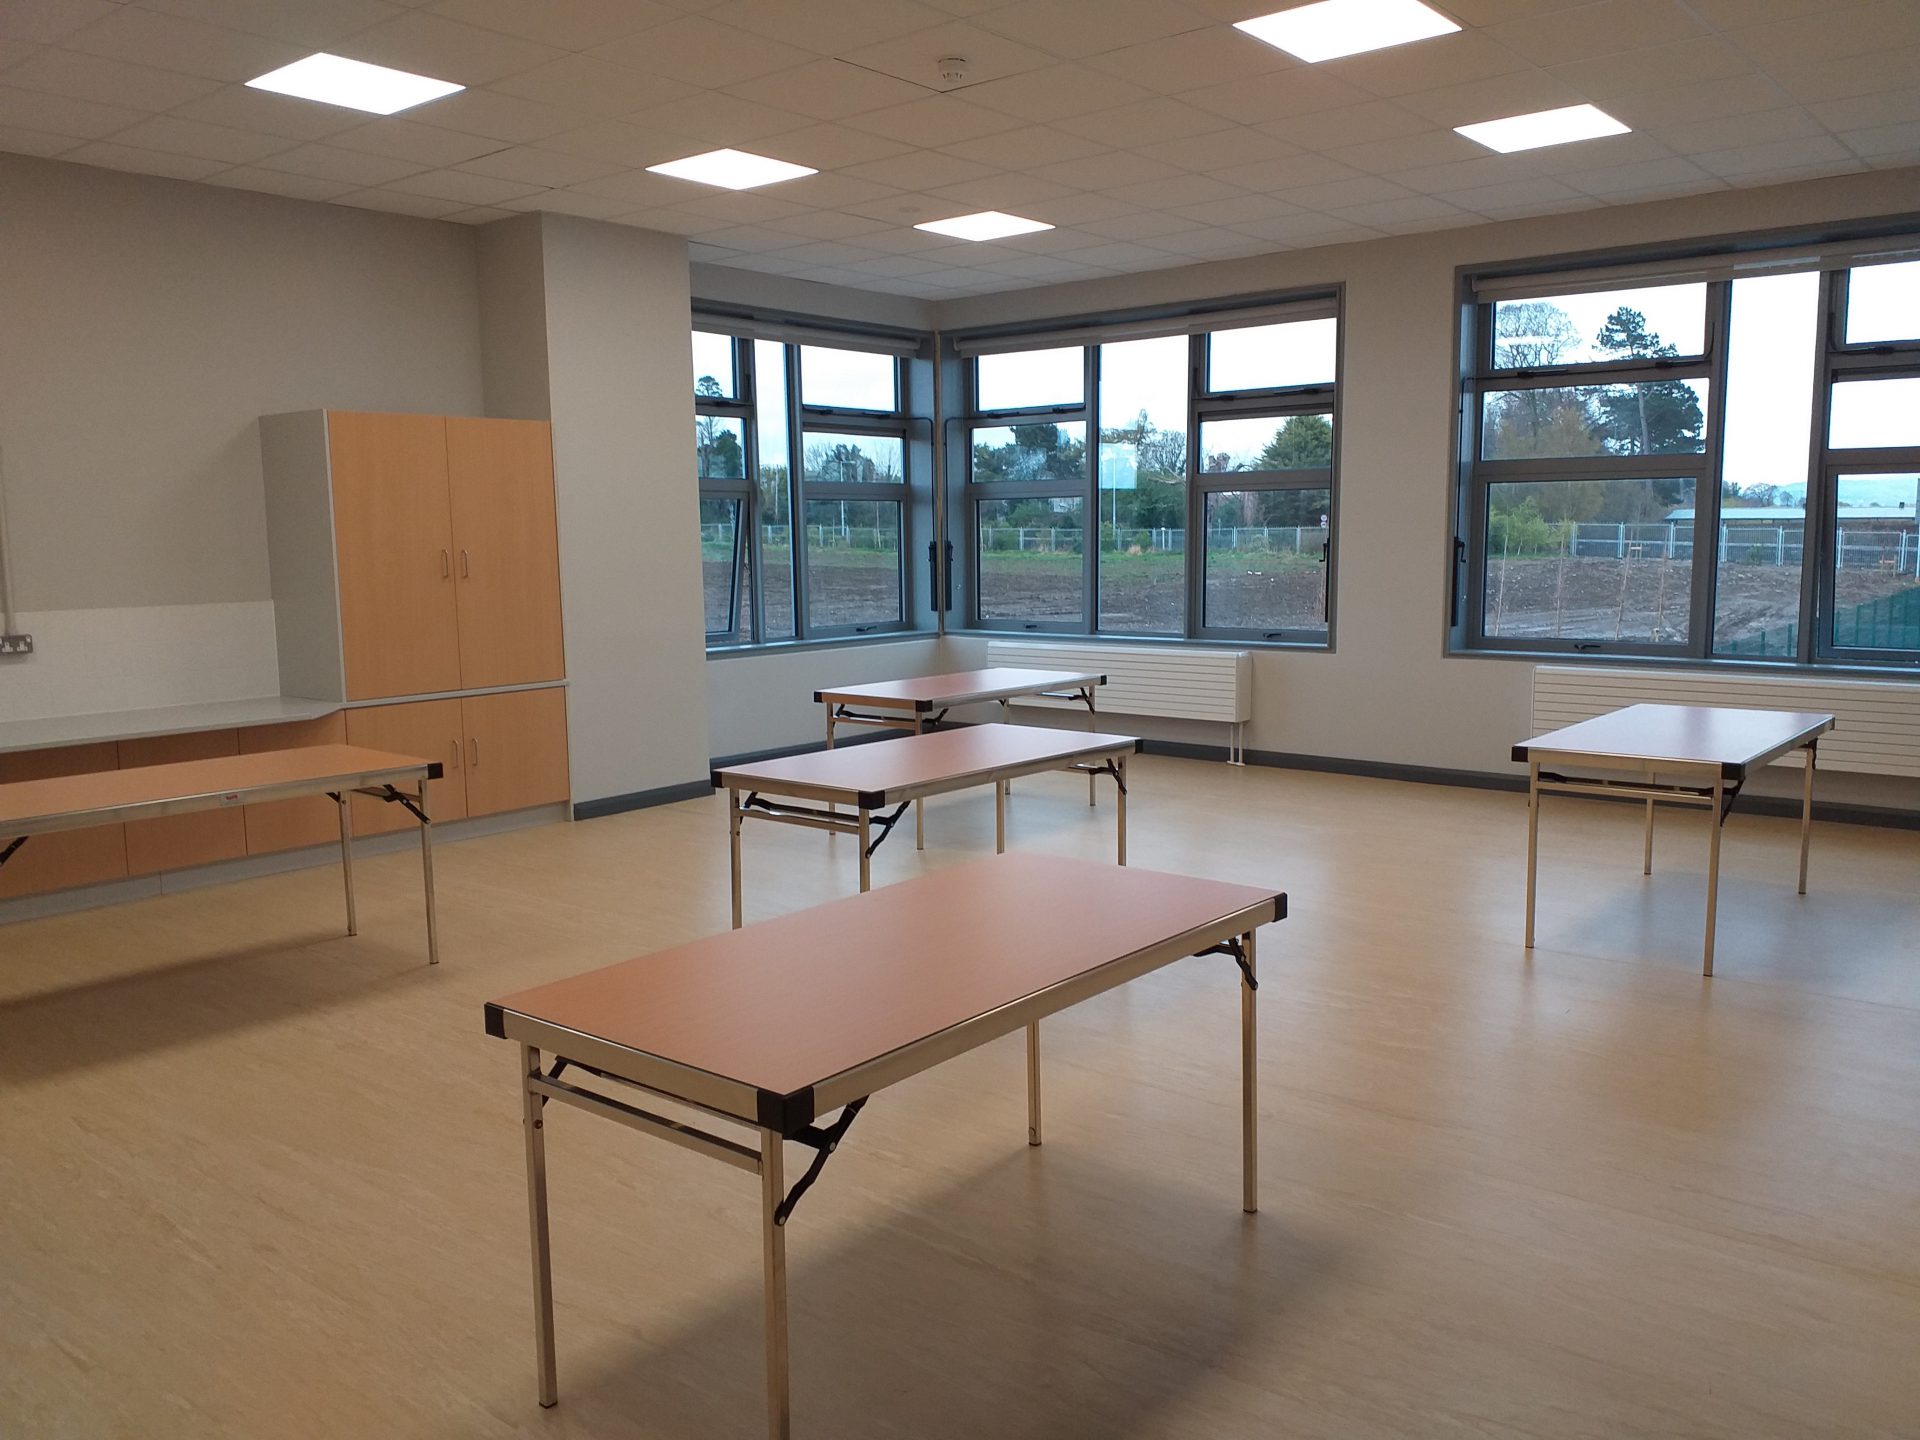 Luttrellstown Community Centre - Youth Room